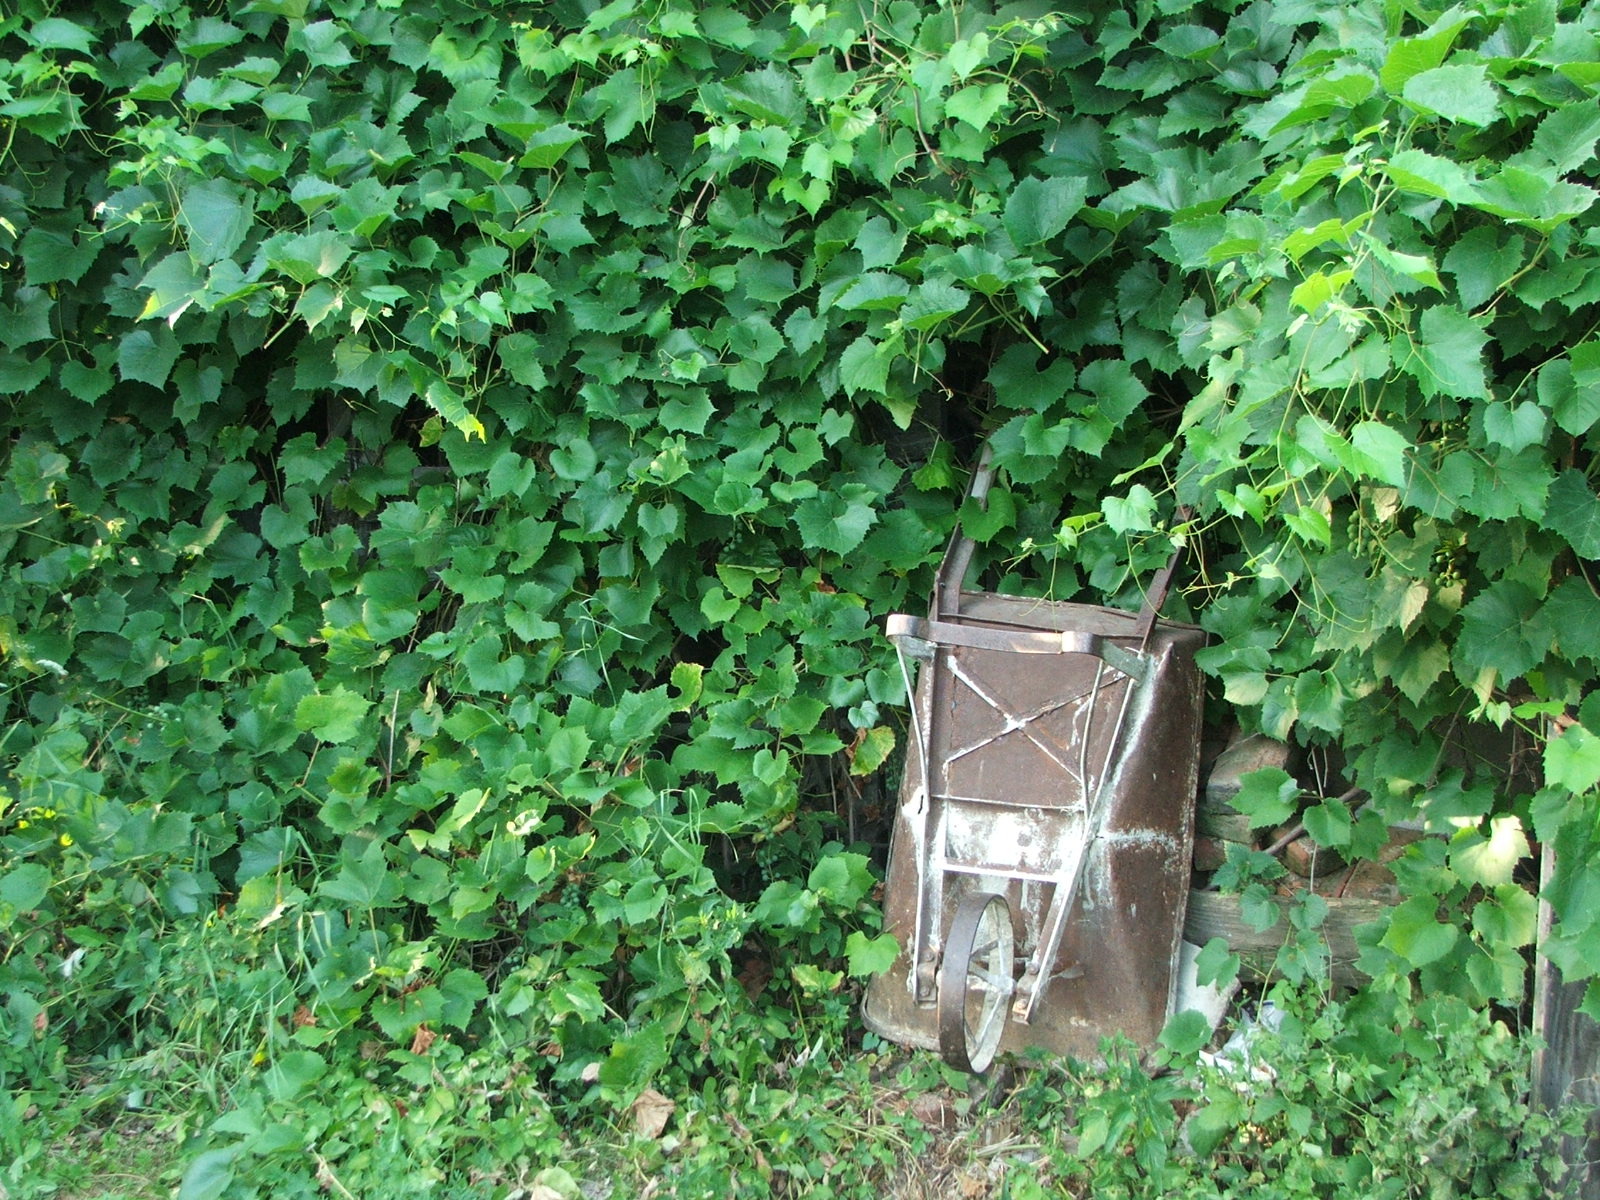 a rusty chair sitting between some bushes and vines